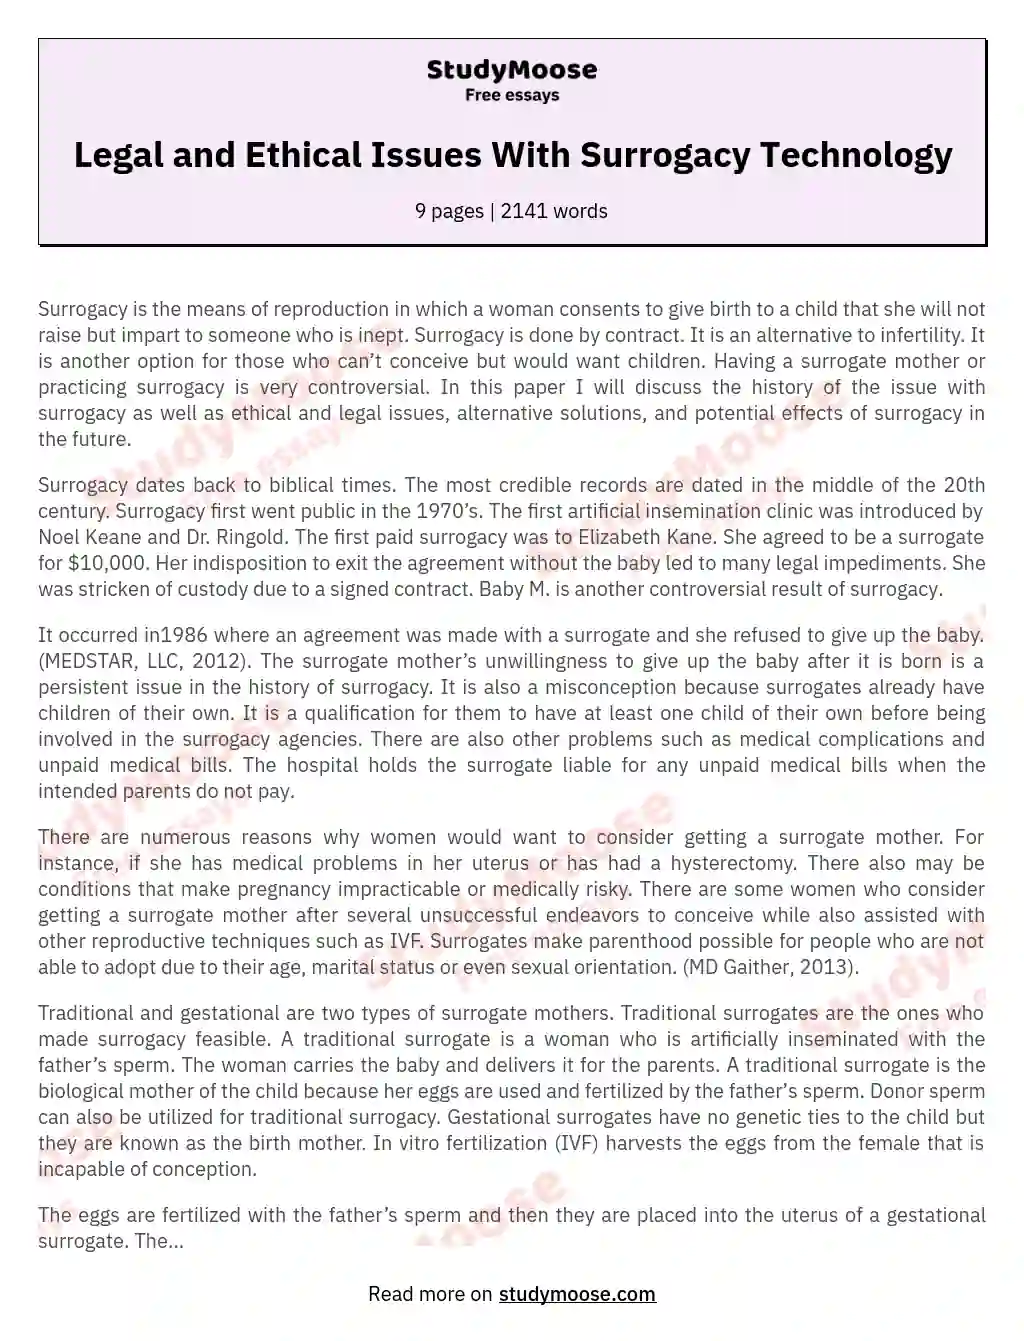 Legal and Ethical Issues With Surrogacy Technology essay